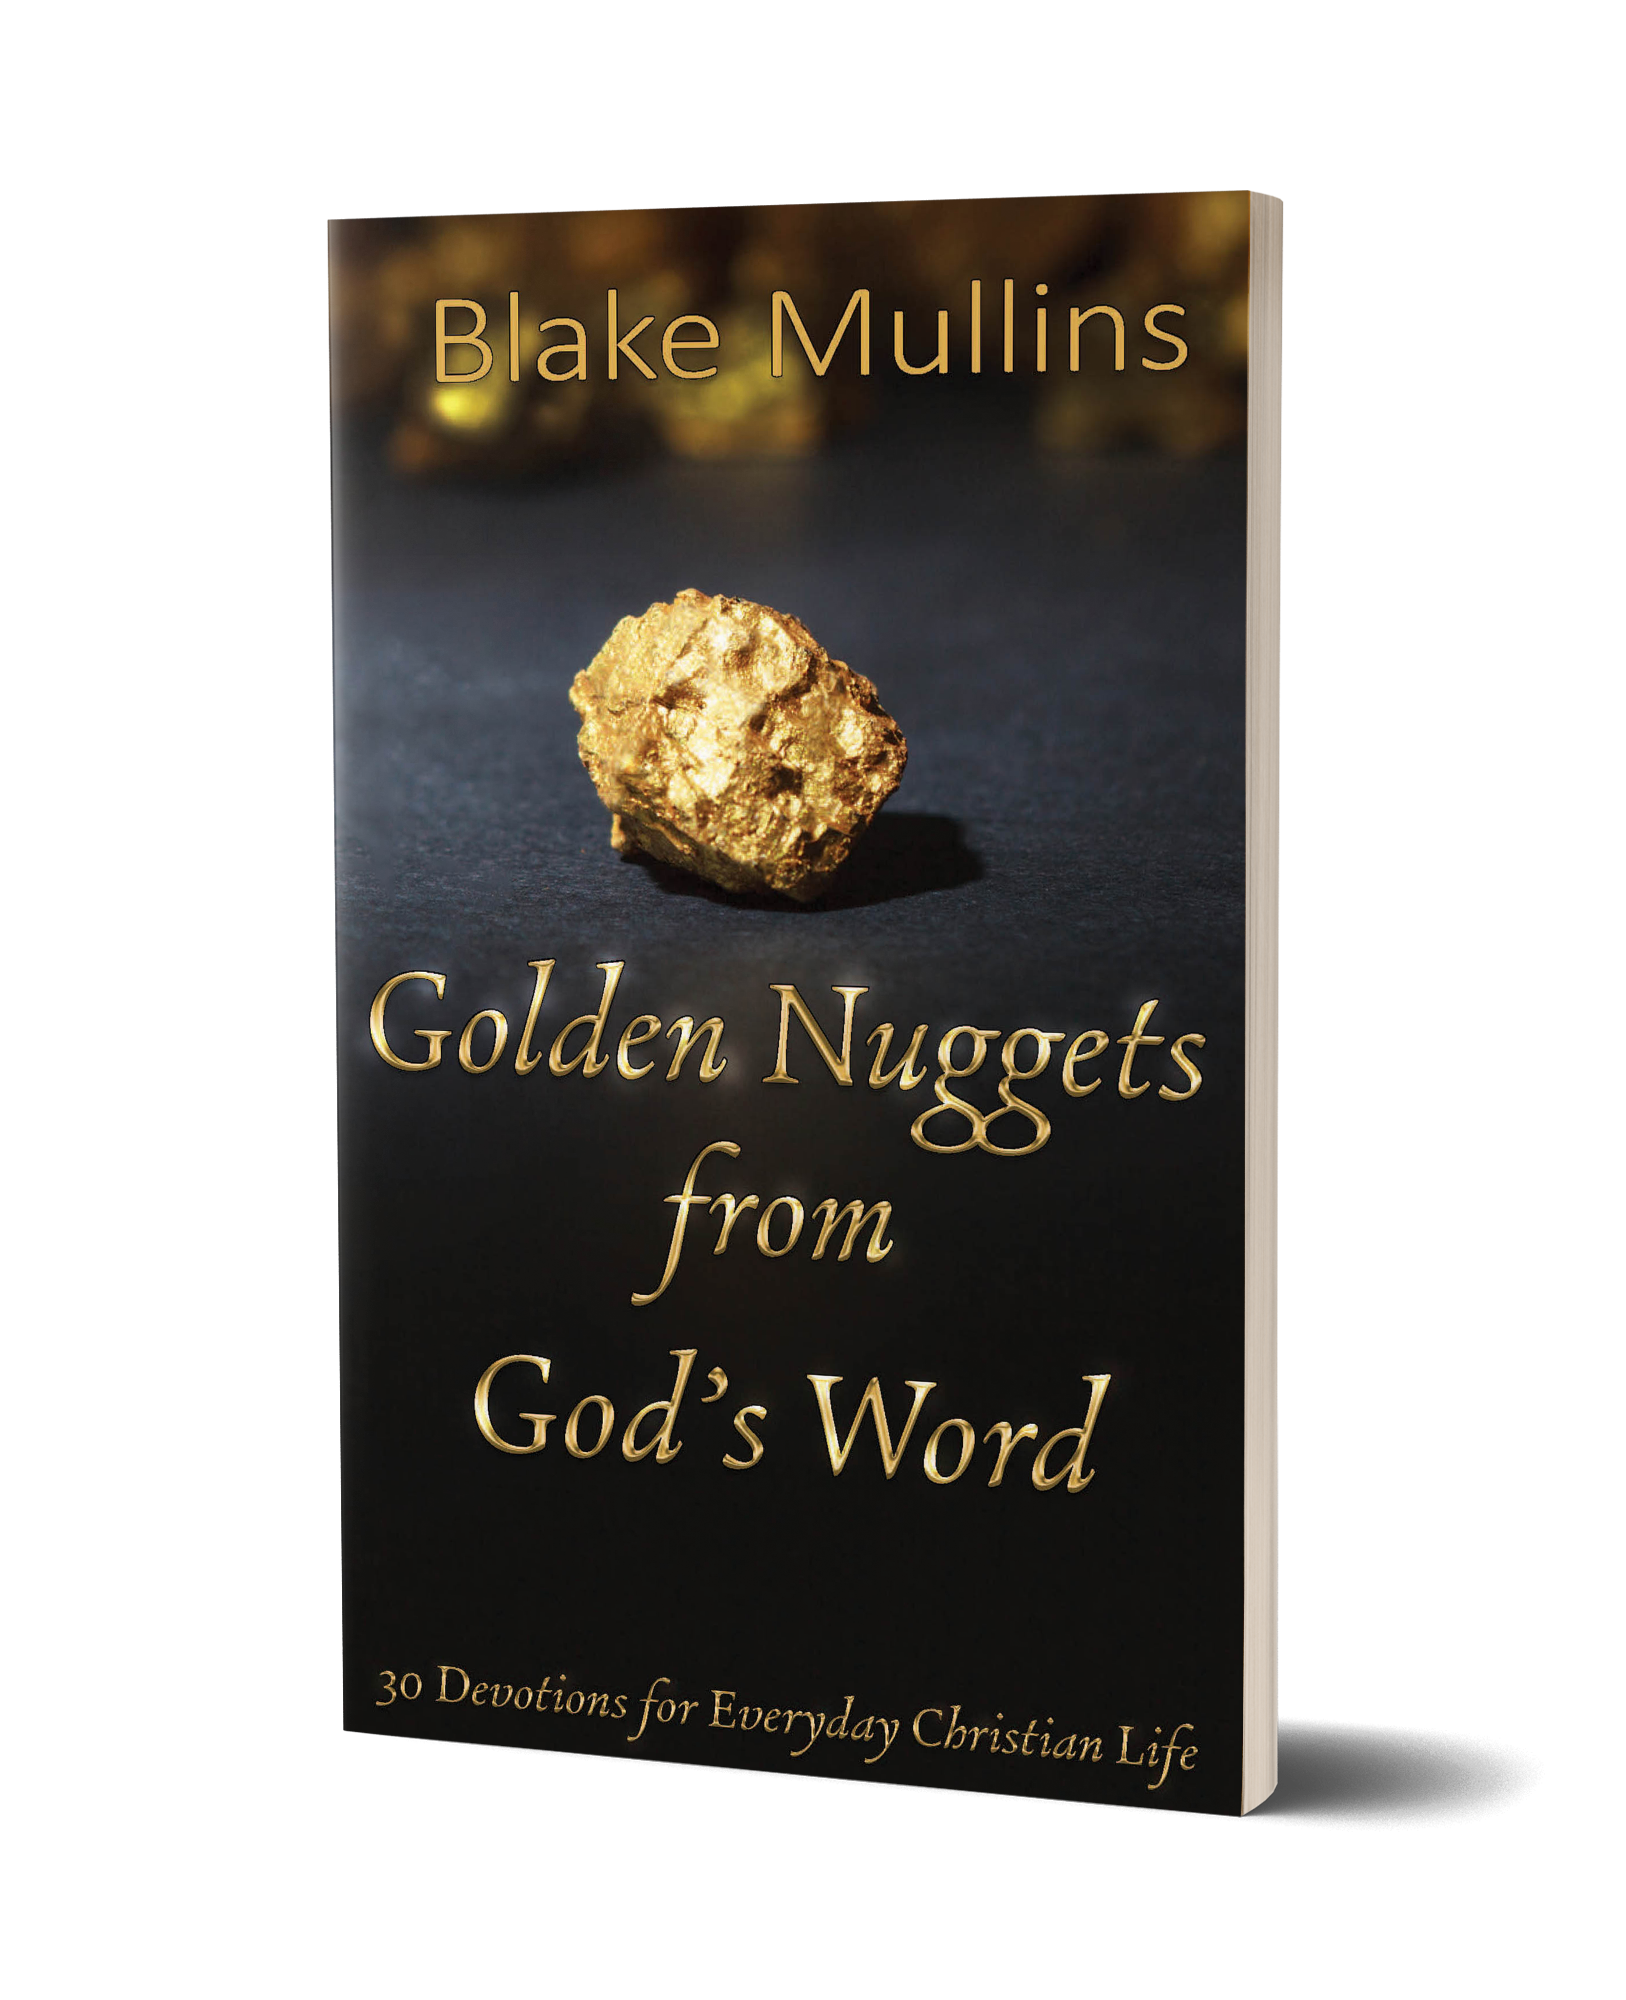 Golden Nuggets from God's Word by Blake Mullins